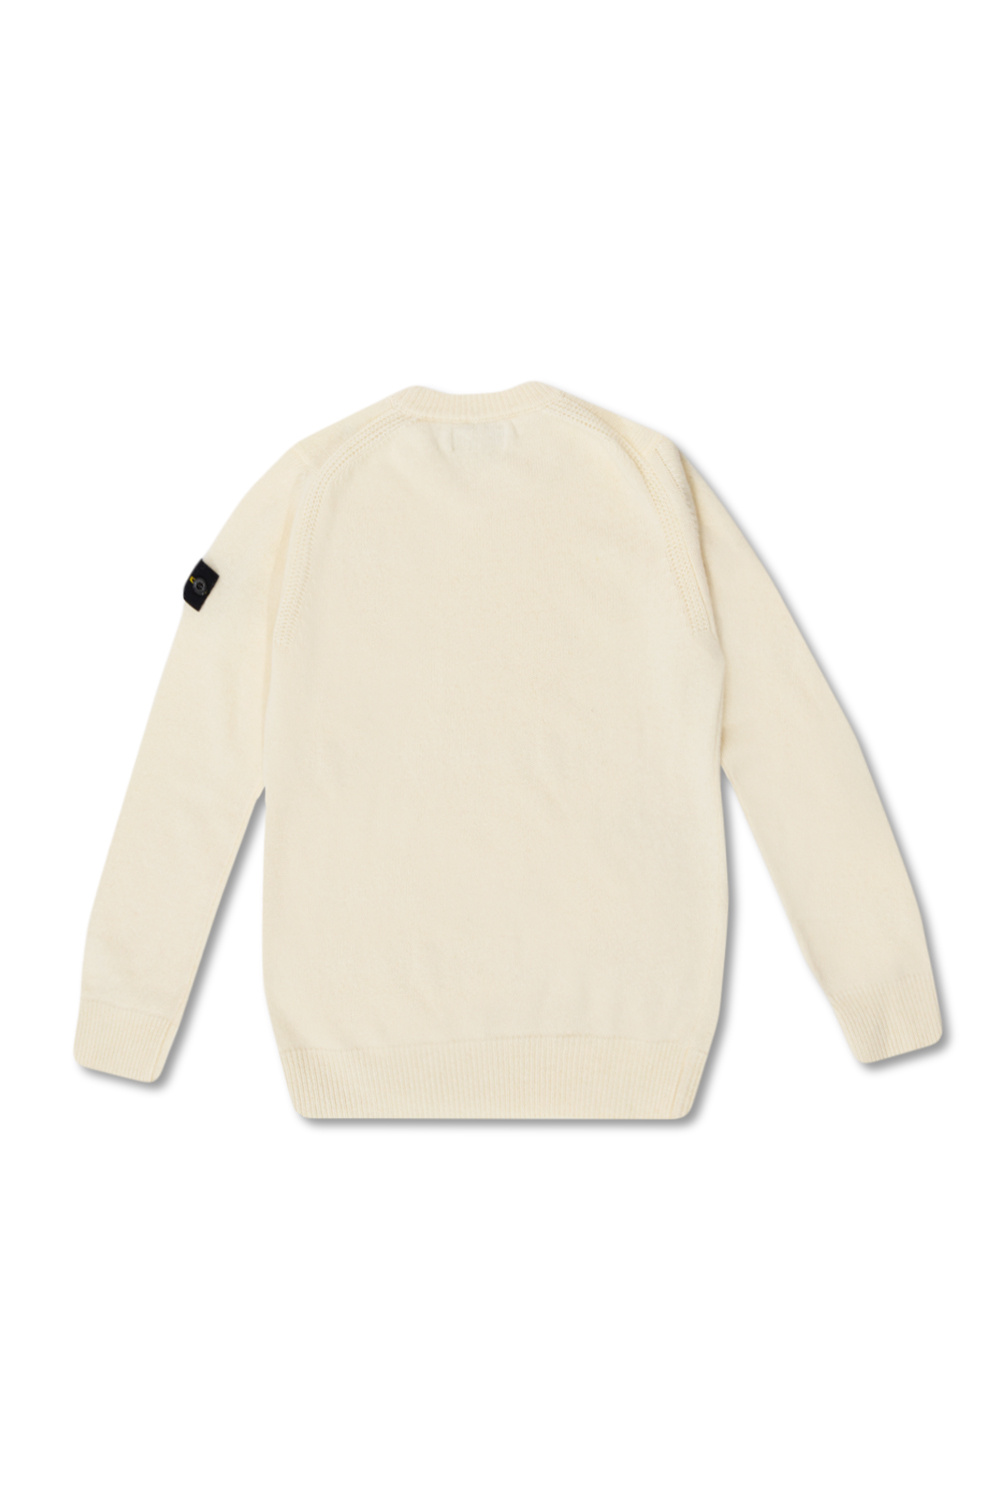 Stone Island Kids sweater moncler with patch